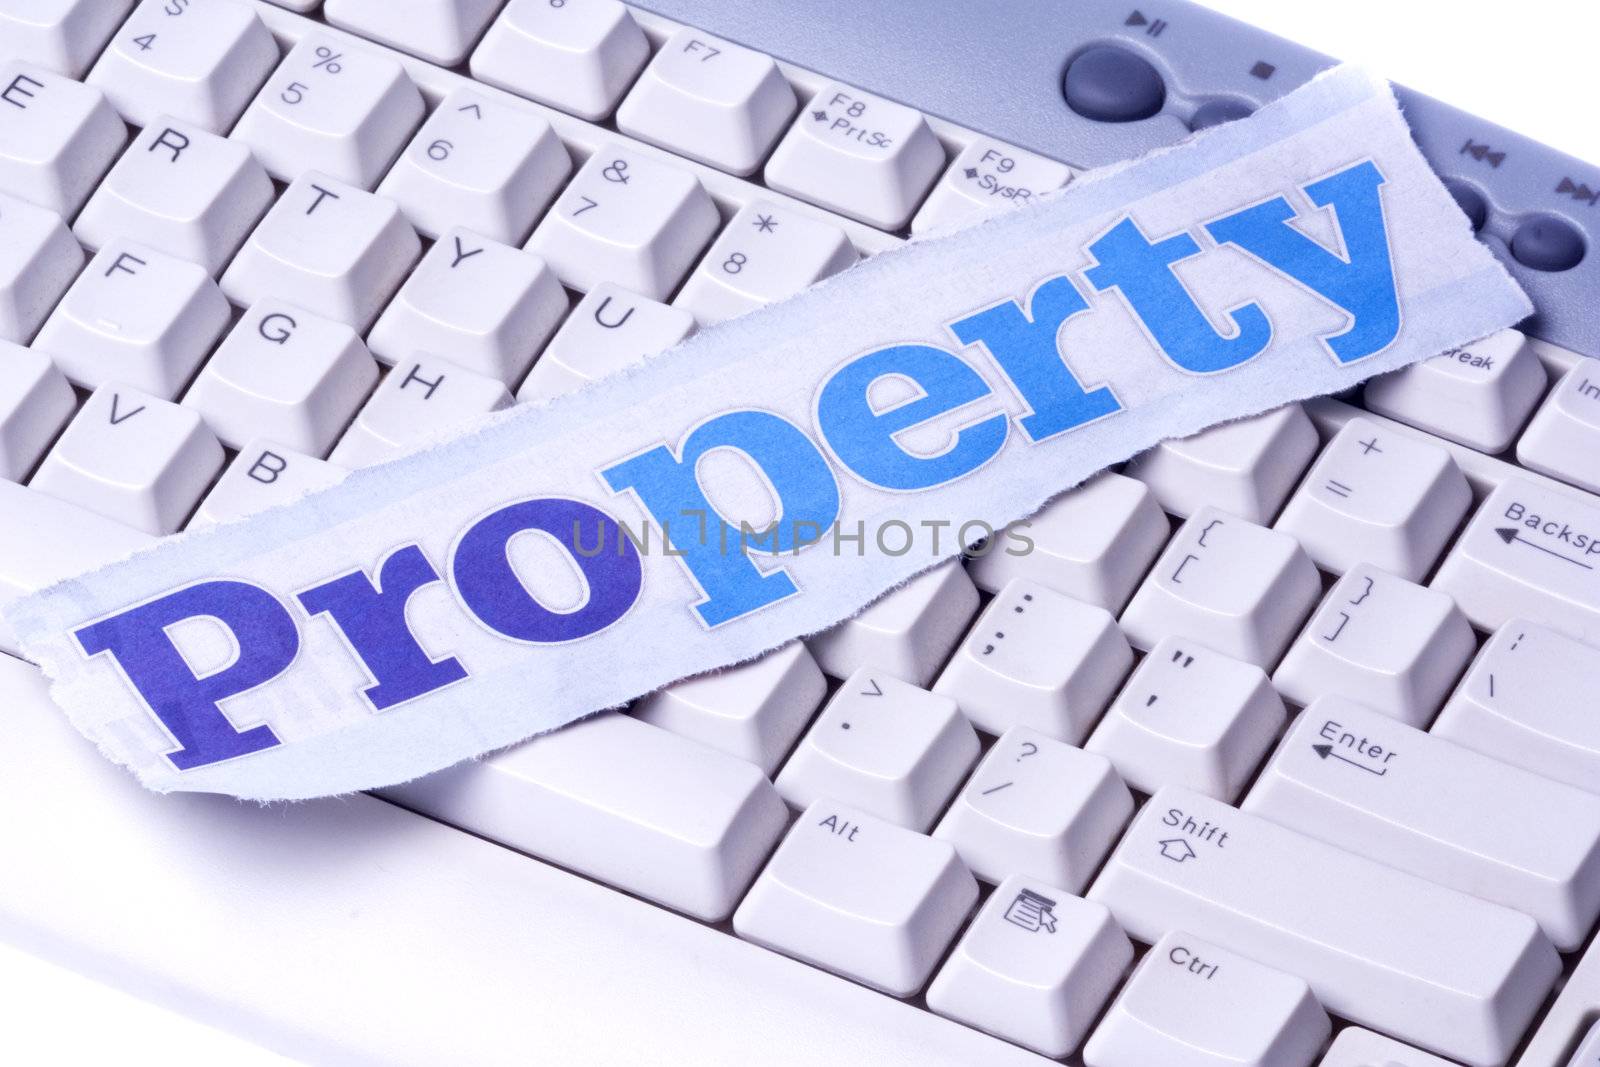 Image of a newspaper cutting with the words "Property" placed on a computer keyboard.